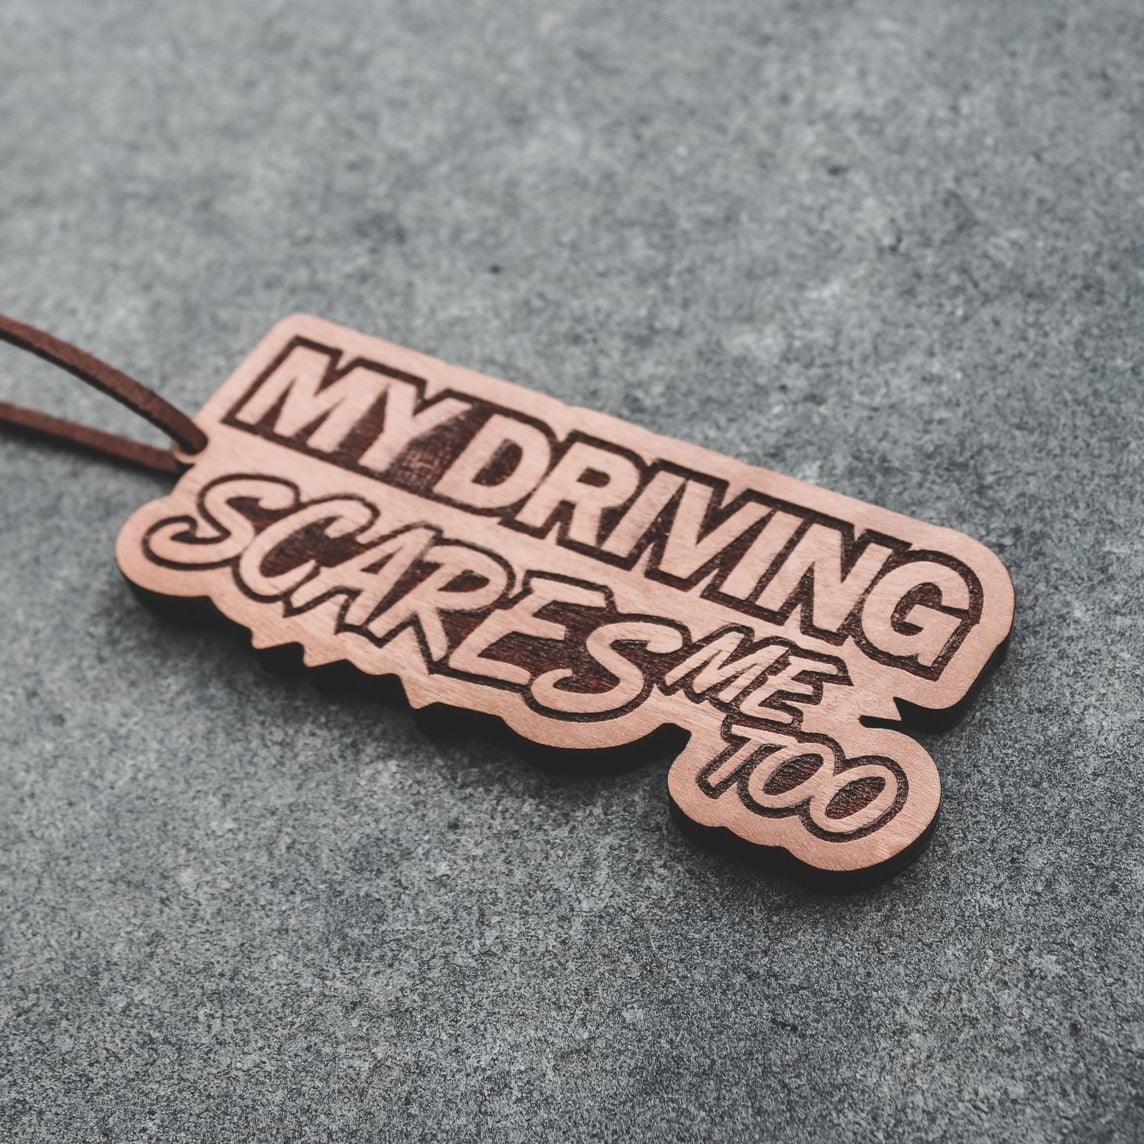 Frshslabs Re-Scentable Wooden Air Freshener (My Driving Scares Me Too)